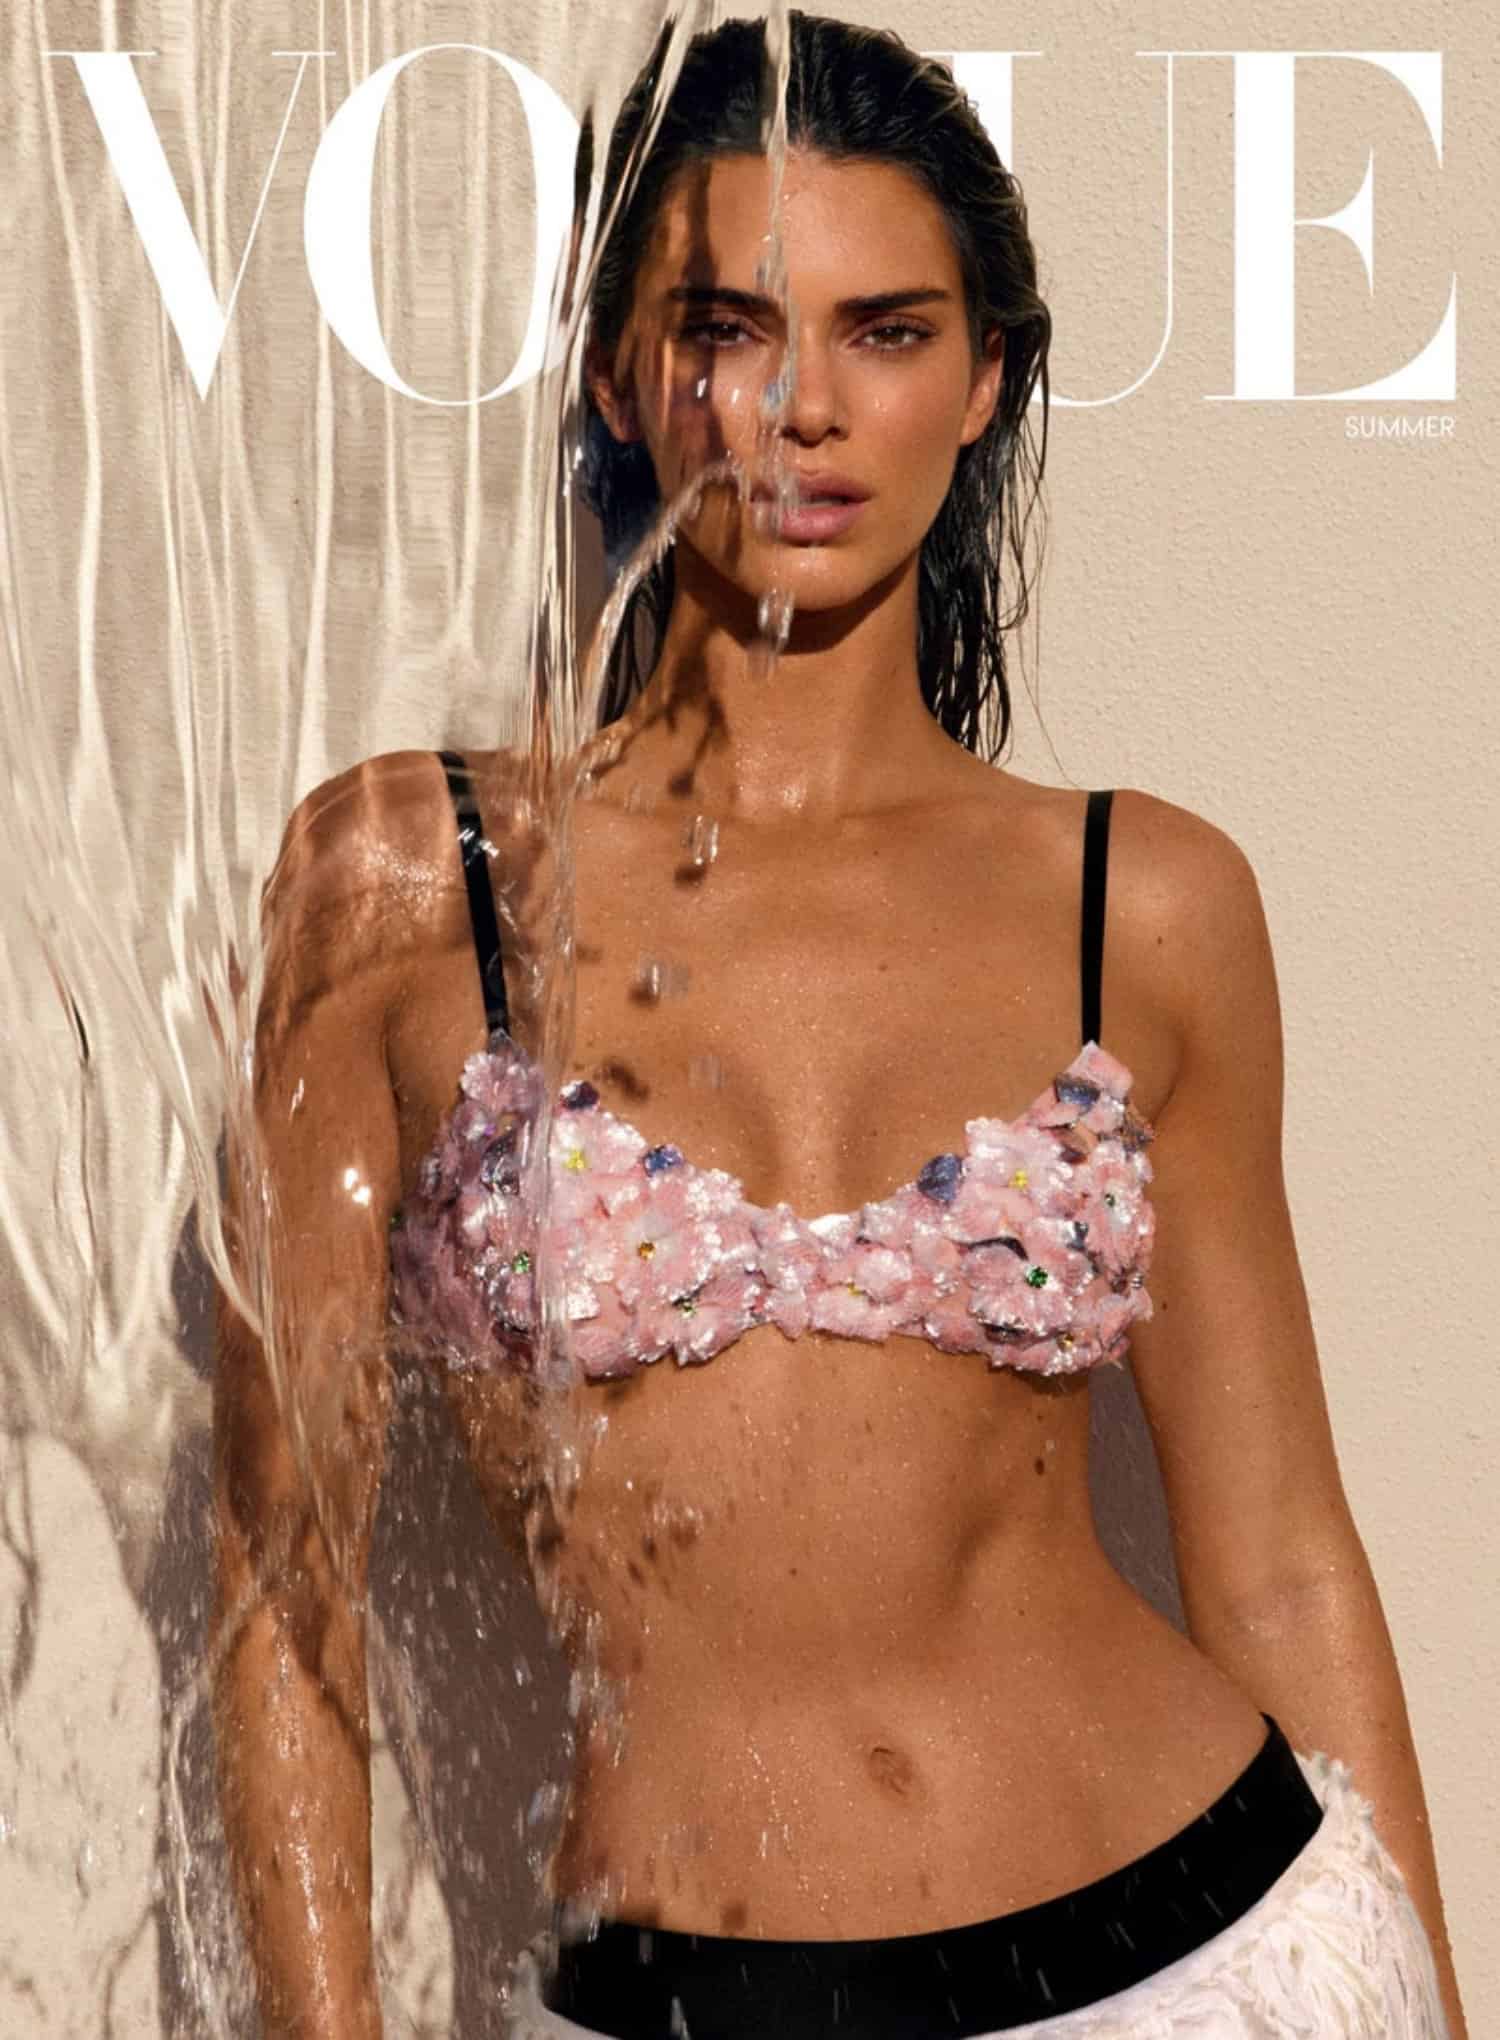 Kendall Jenner, Vogue, magazines, covers